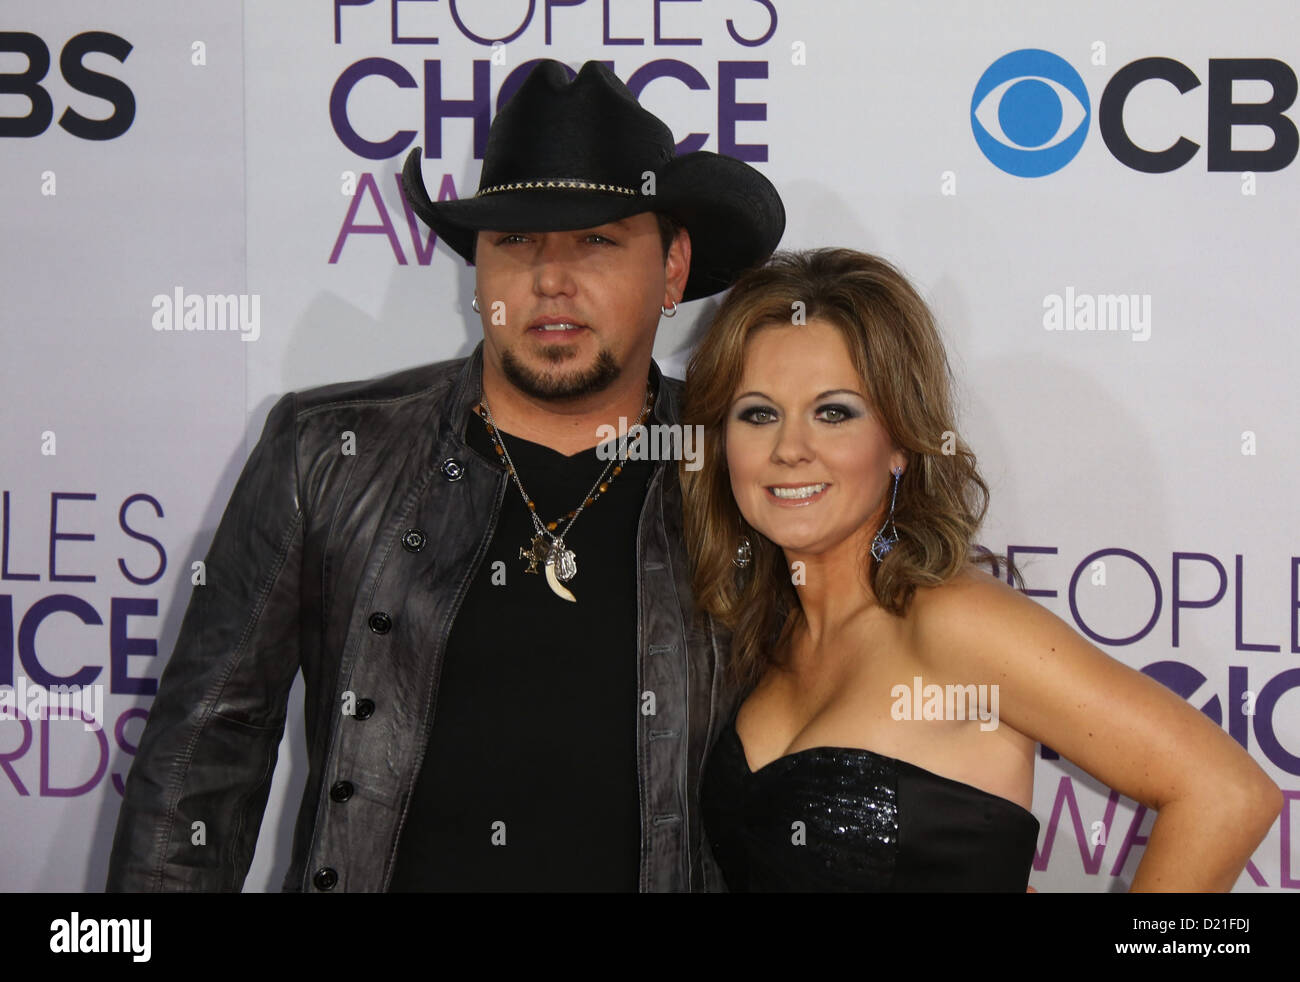 Country singer Jason Aldean and Jessica Aldean arrive at the 39th Annual People's Choice Awards at Nokia Theatre at L.A. Live in Los Angeles, USA, on 09 January 2013. Photo: Hubert Boesl/dpa Stock Photo